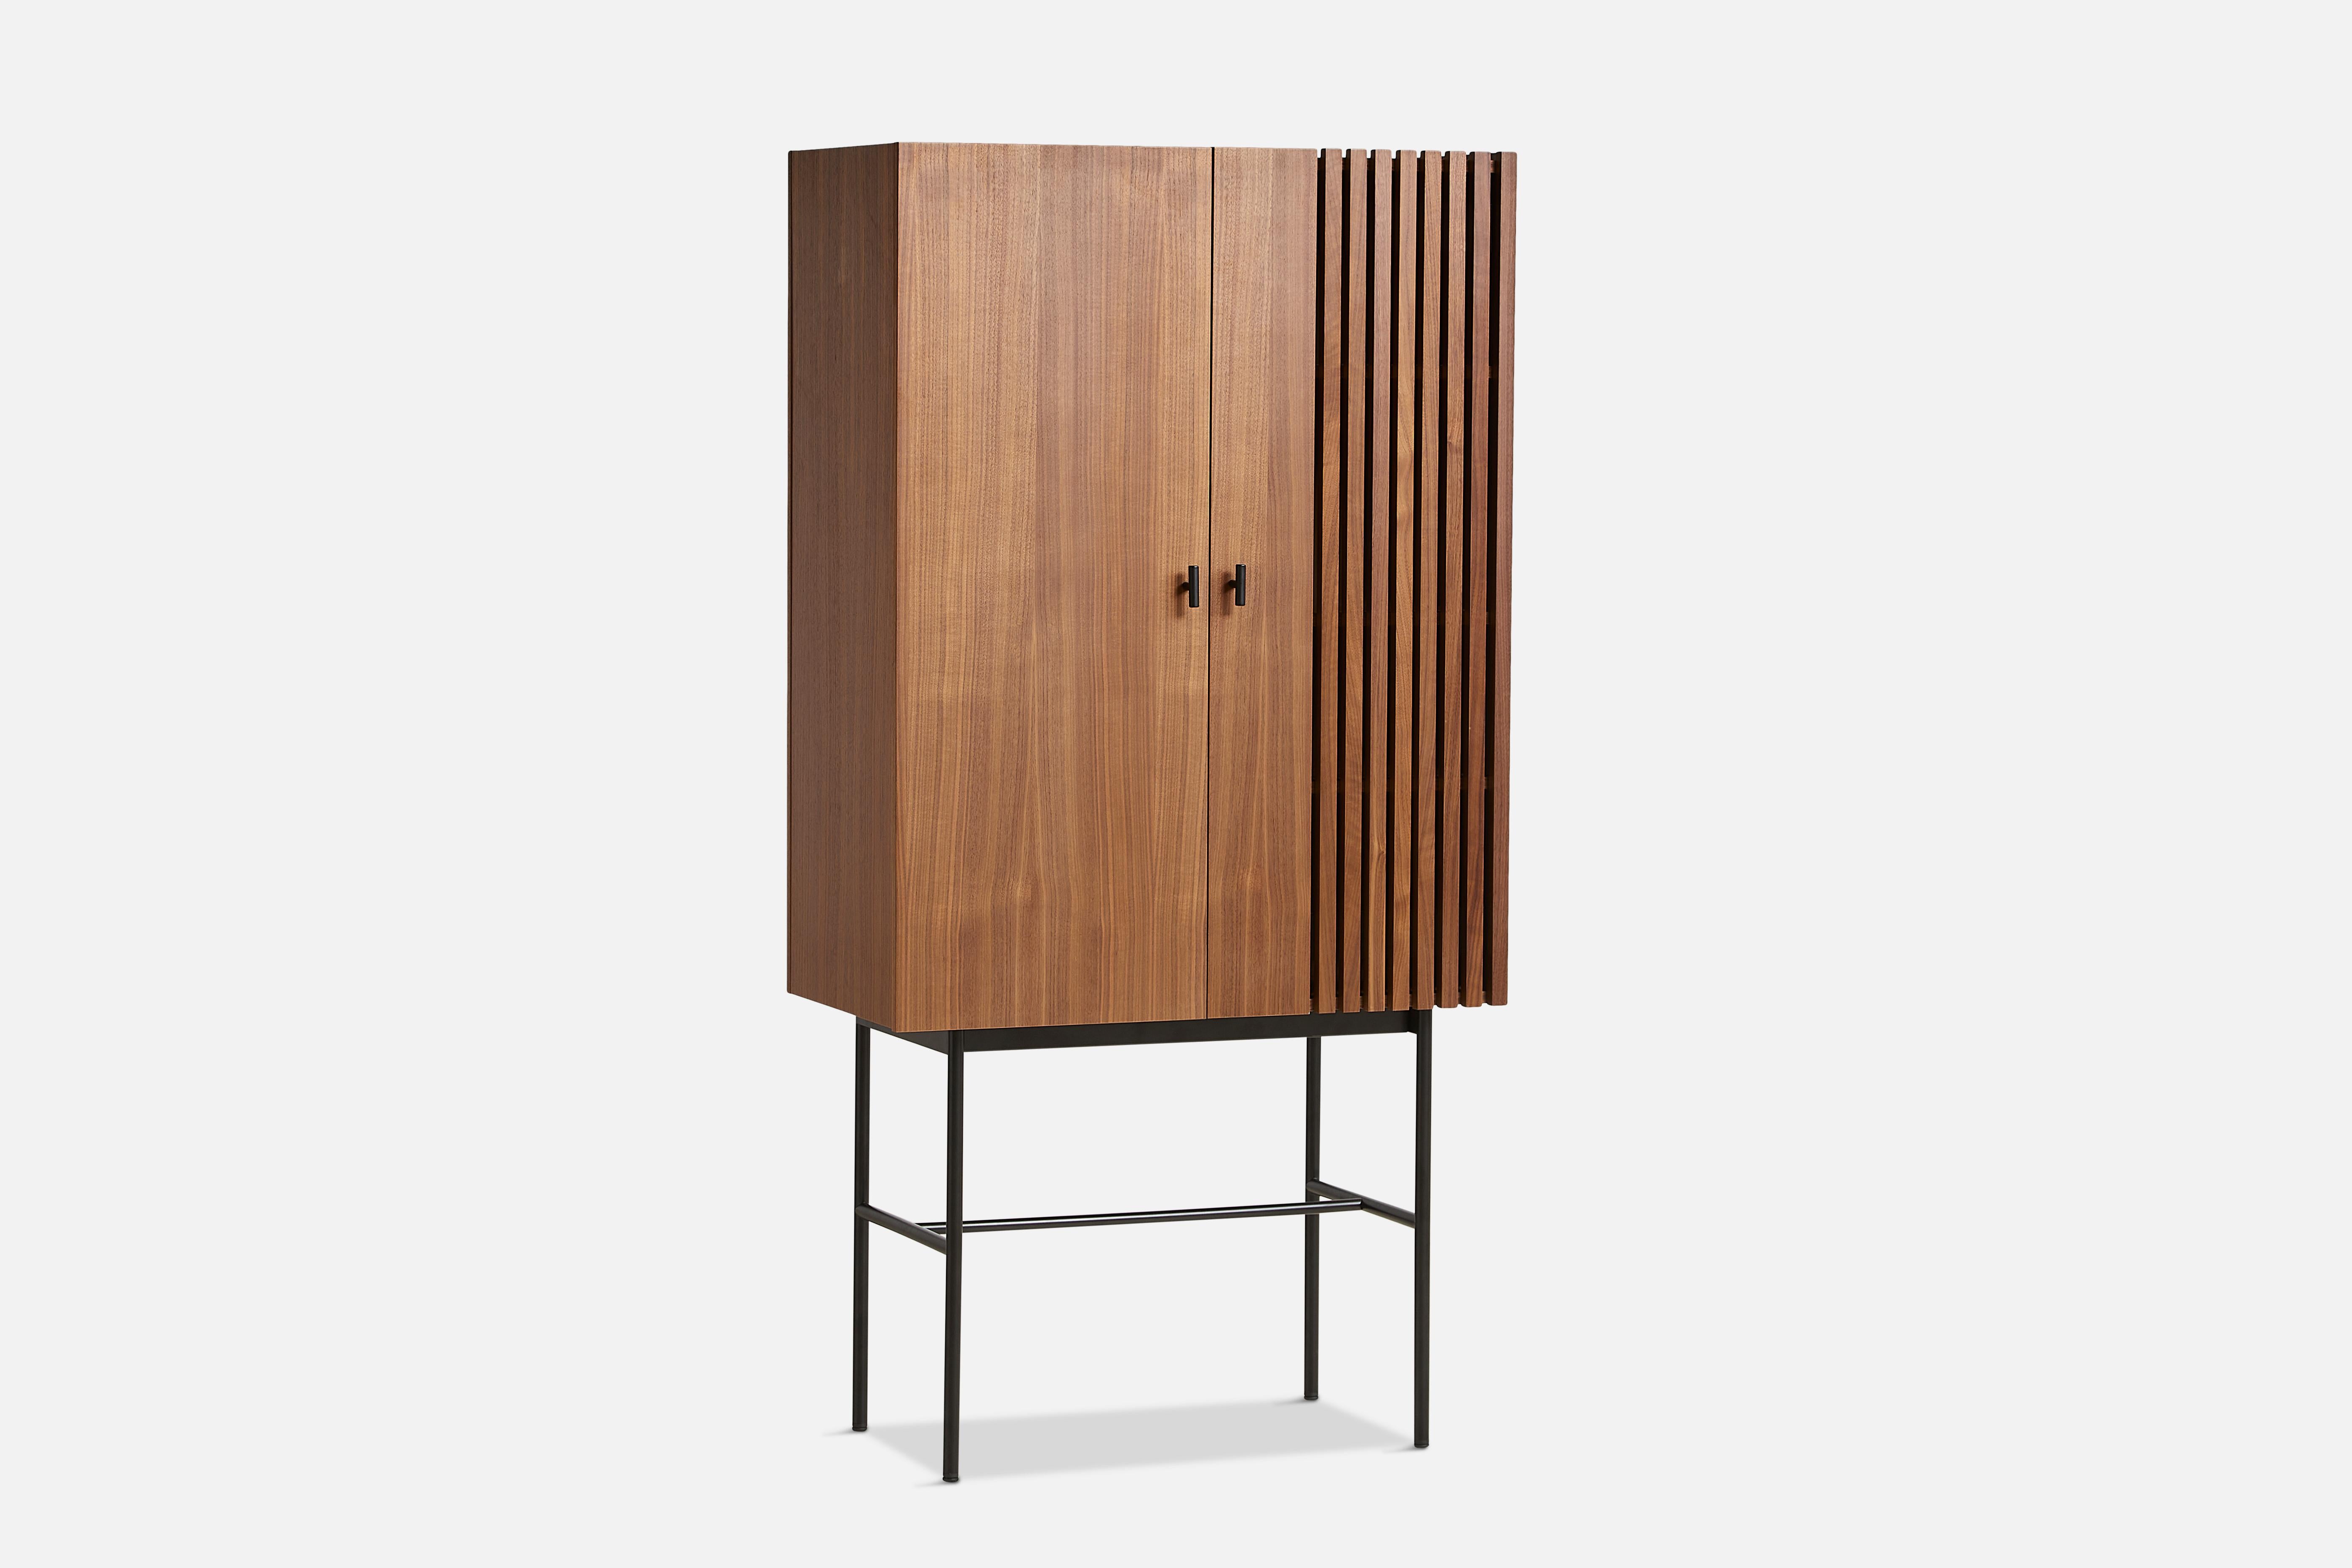 Walnut array highboard 80 by Says Who.
Materials: Walnut, metal.
Dimensions: D 44 x W 80 x H 160 cm.
Also available in different colours and materials.

The founders, Mia and Torben Koed, decided to put their 30 years of experience into a new